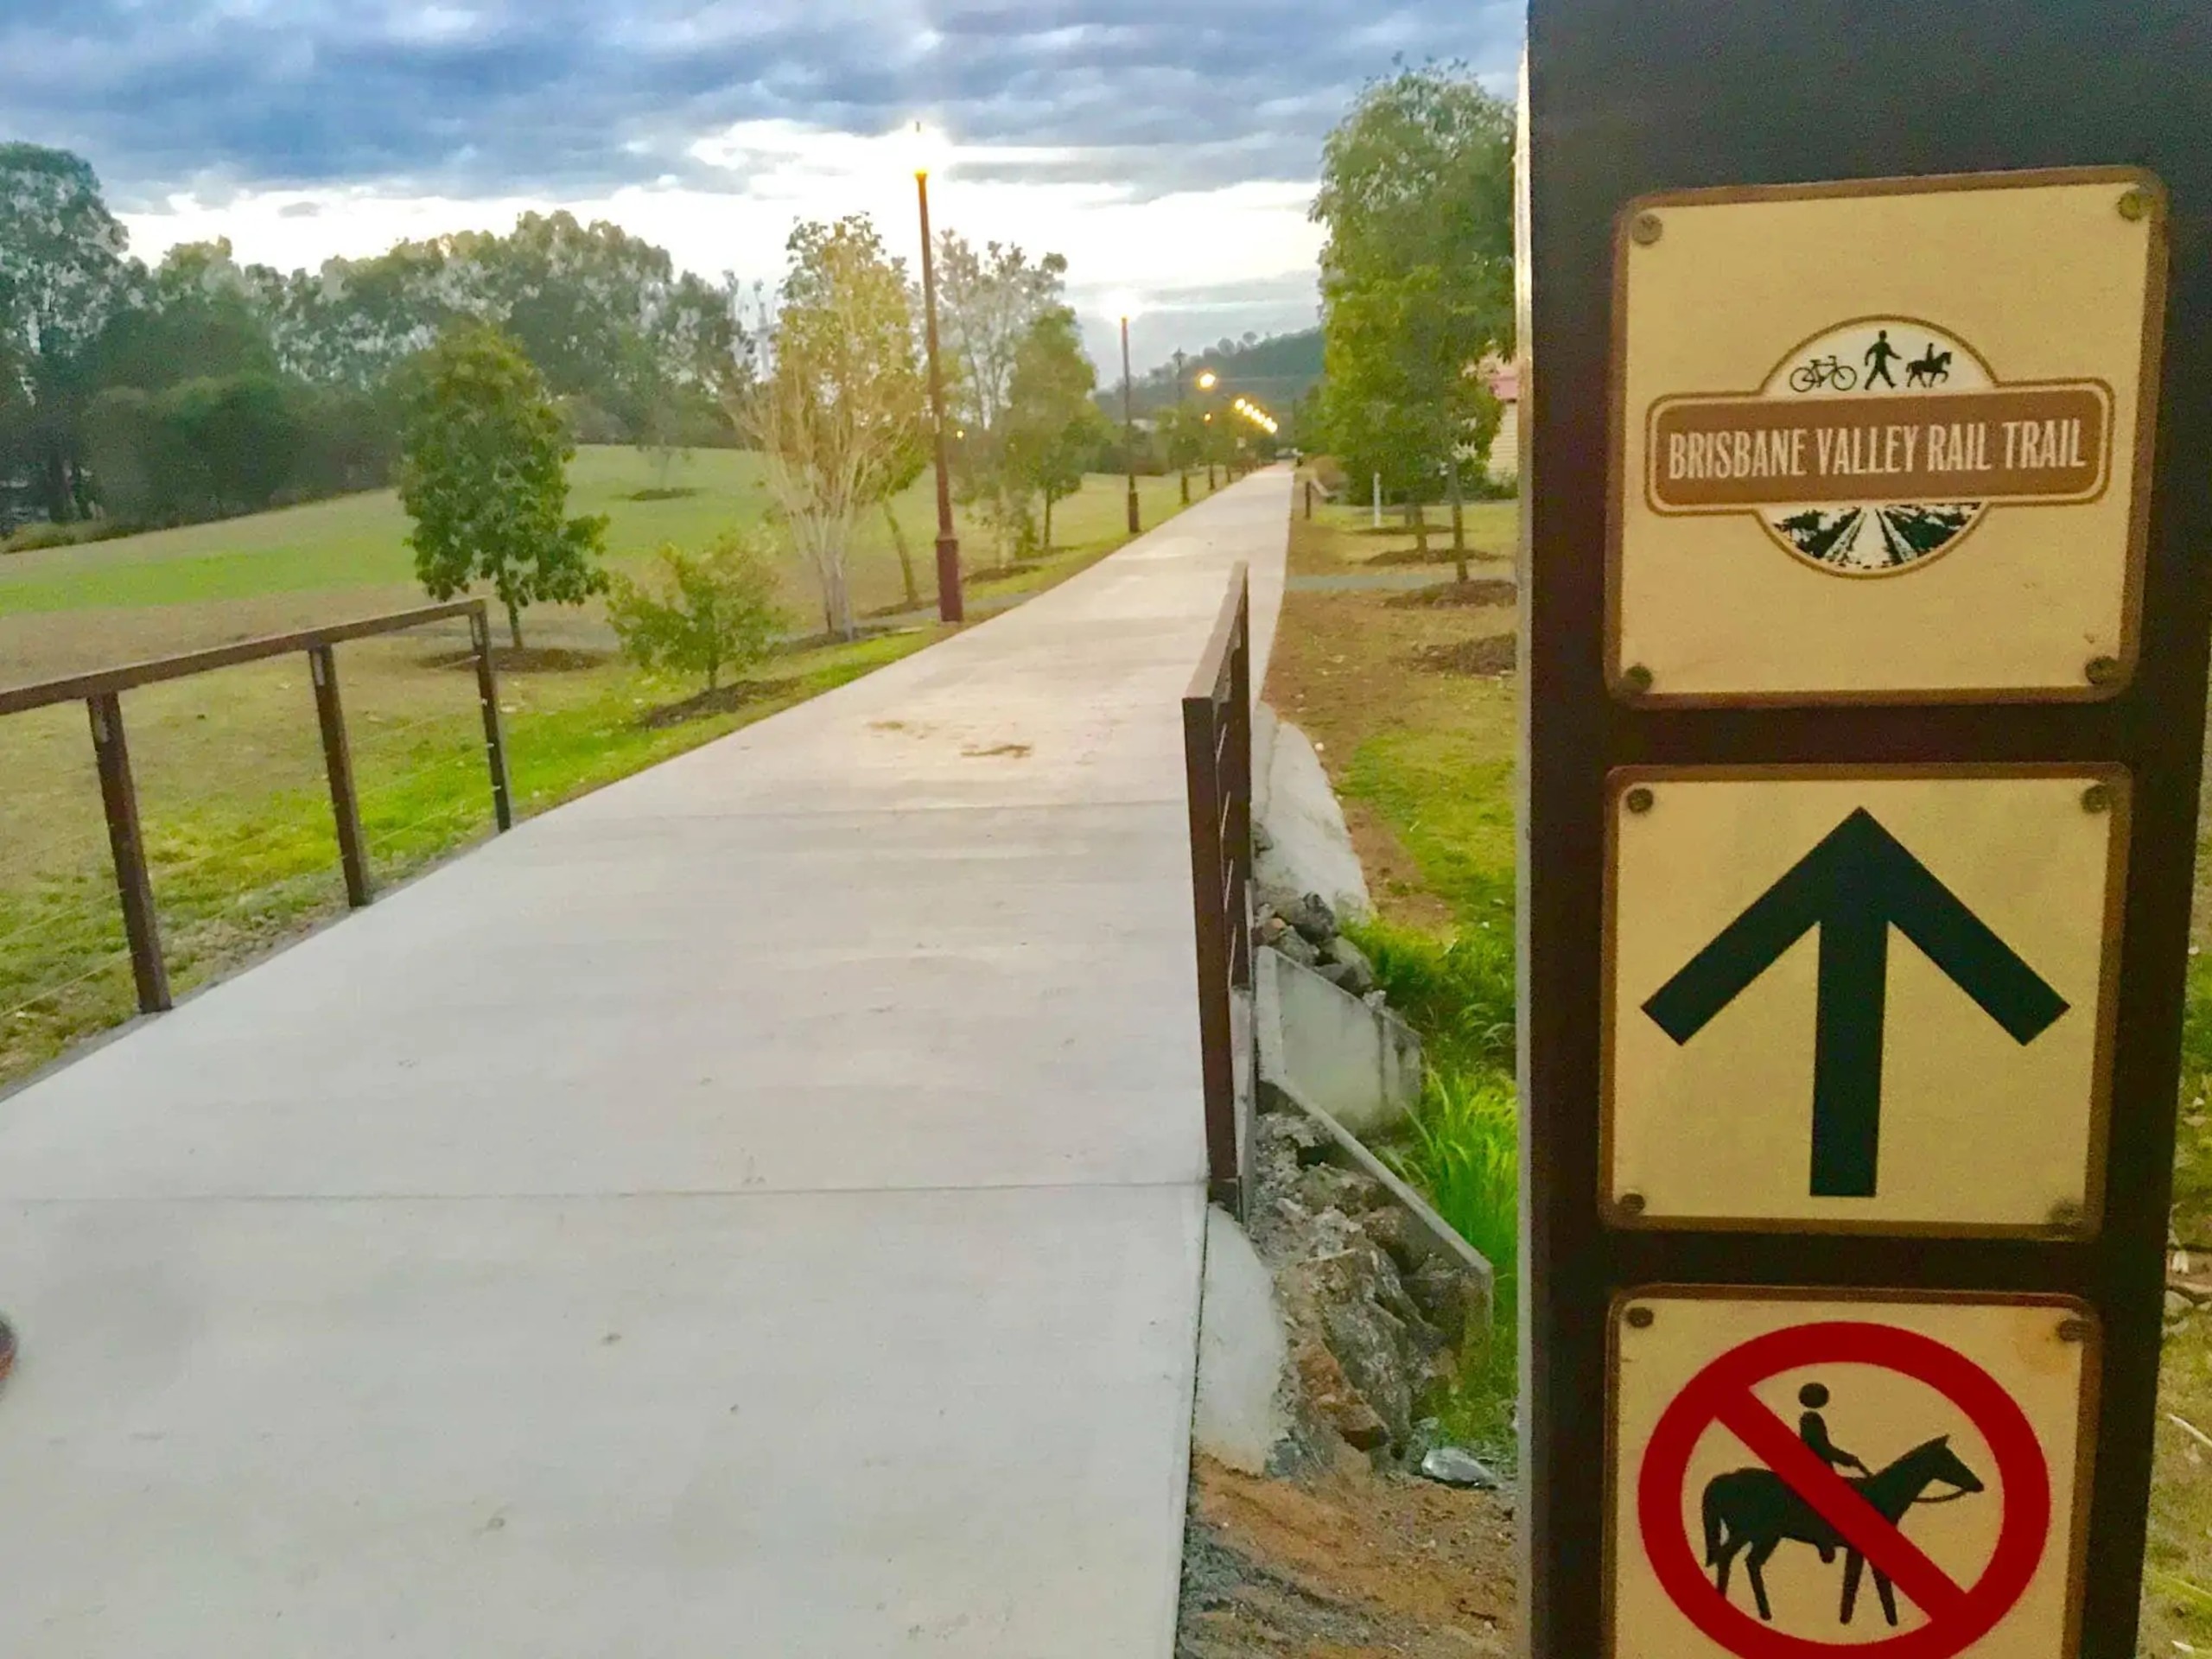 Route Signage along the cycling trail in Queensland